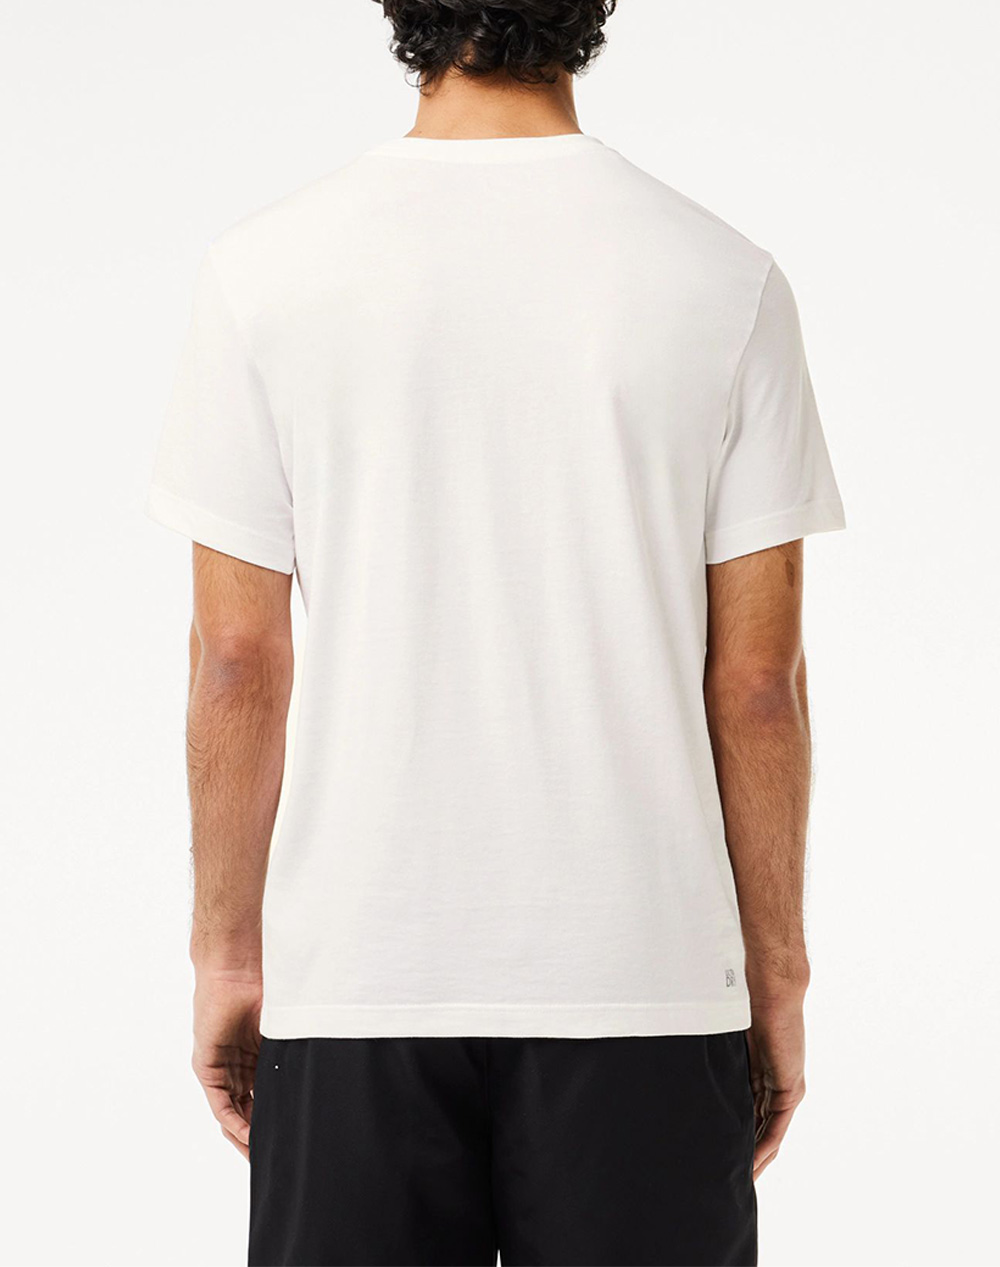 LACOSTE MENS TEE-SHIRT SS